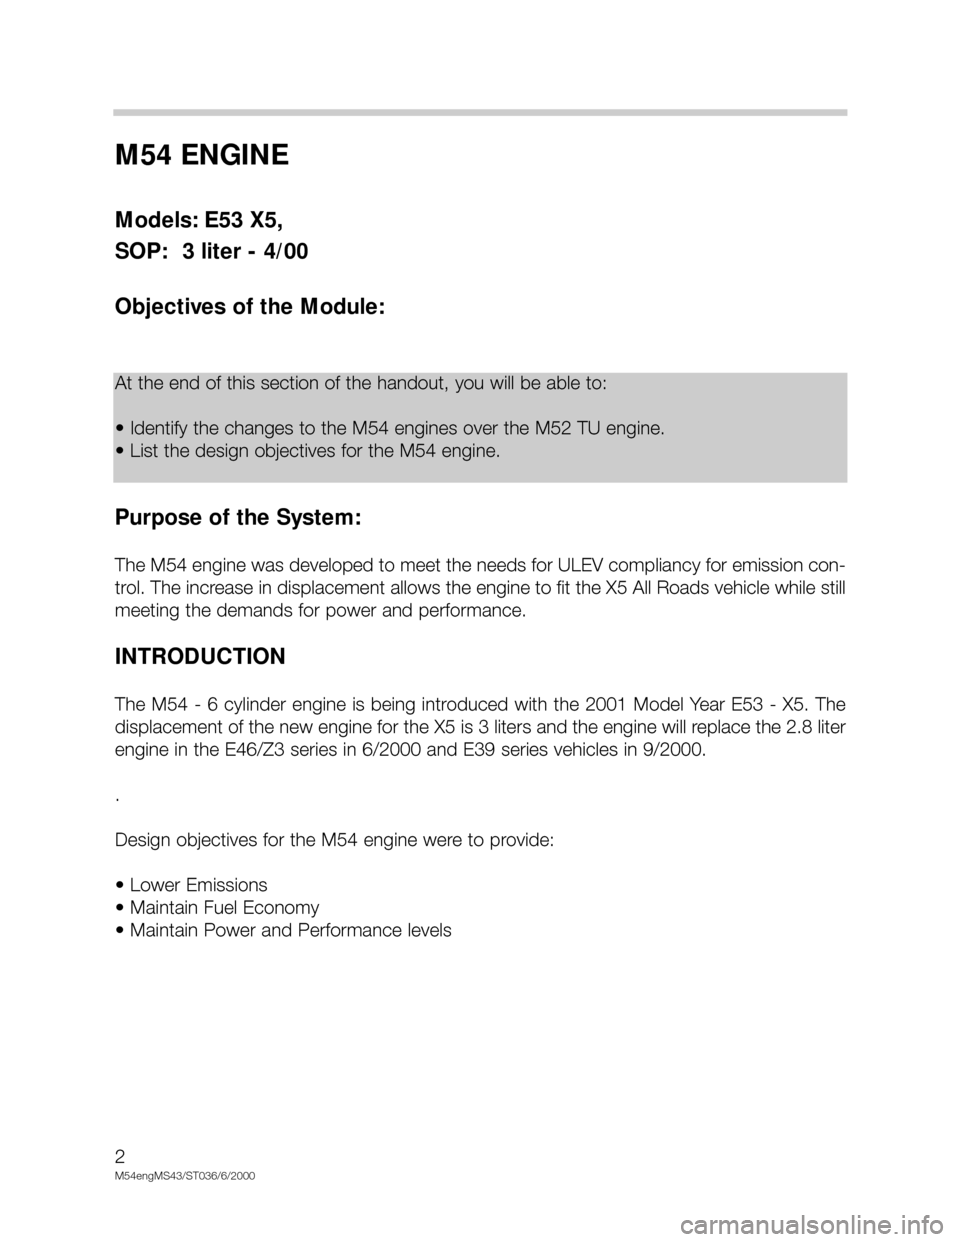 BMW X5 2005 E53 M54 Engine Workshop Manual M54 ENGINE 
Models: E53 X5, 
SOP:  3 liter - 4/00
Objectives of the Module:
Purpose of the System:
The M54 engine was developed to meet the needs for ULEV compliancy for emission con-
trol. The increa